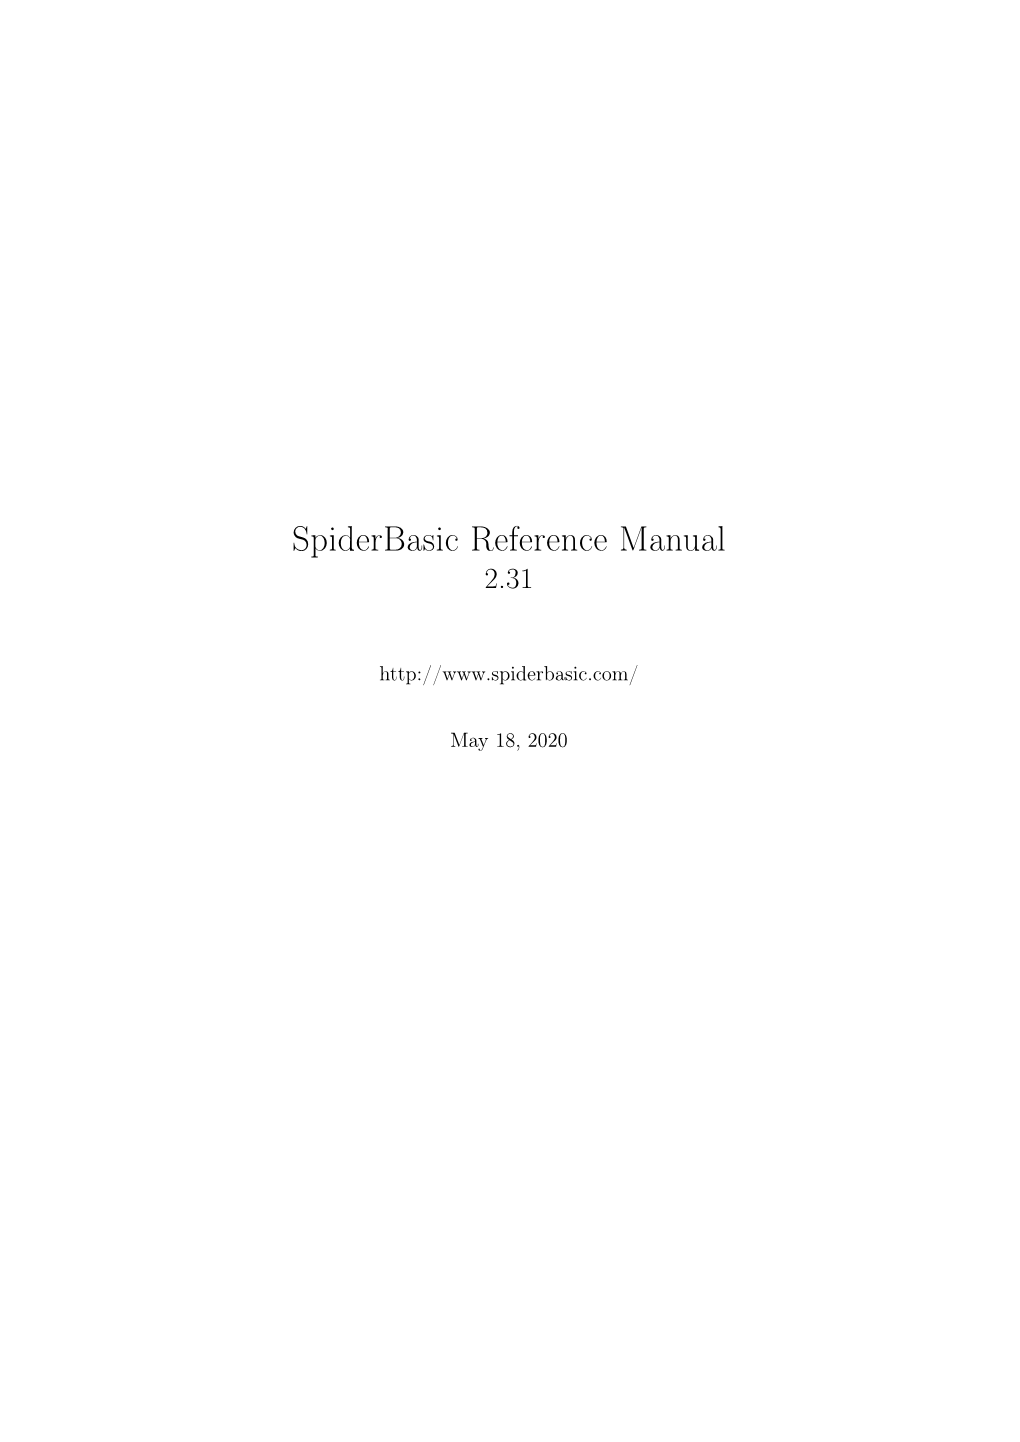 Spiderbasic Reference Manual 2.31